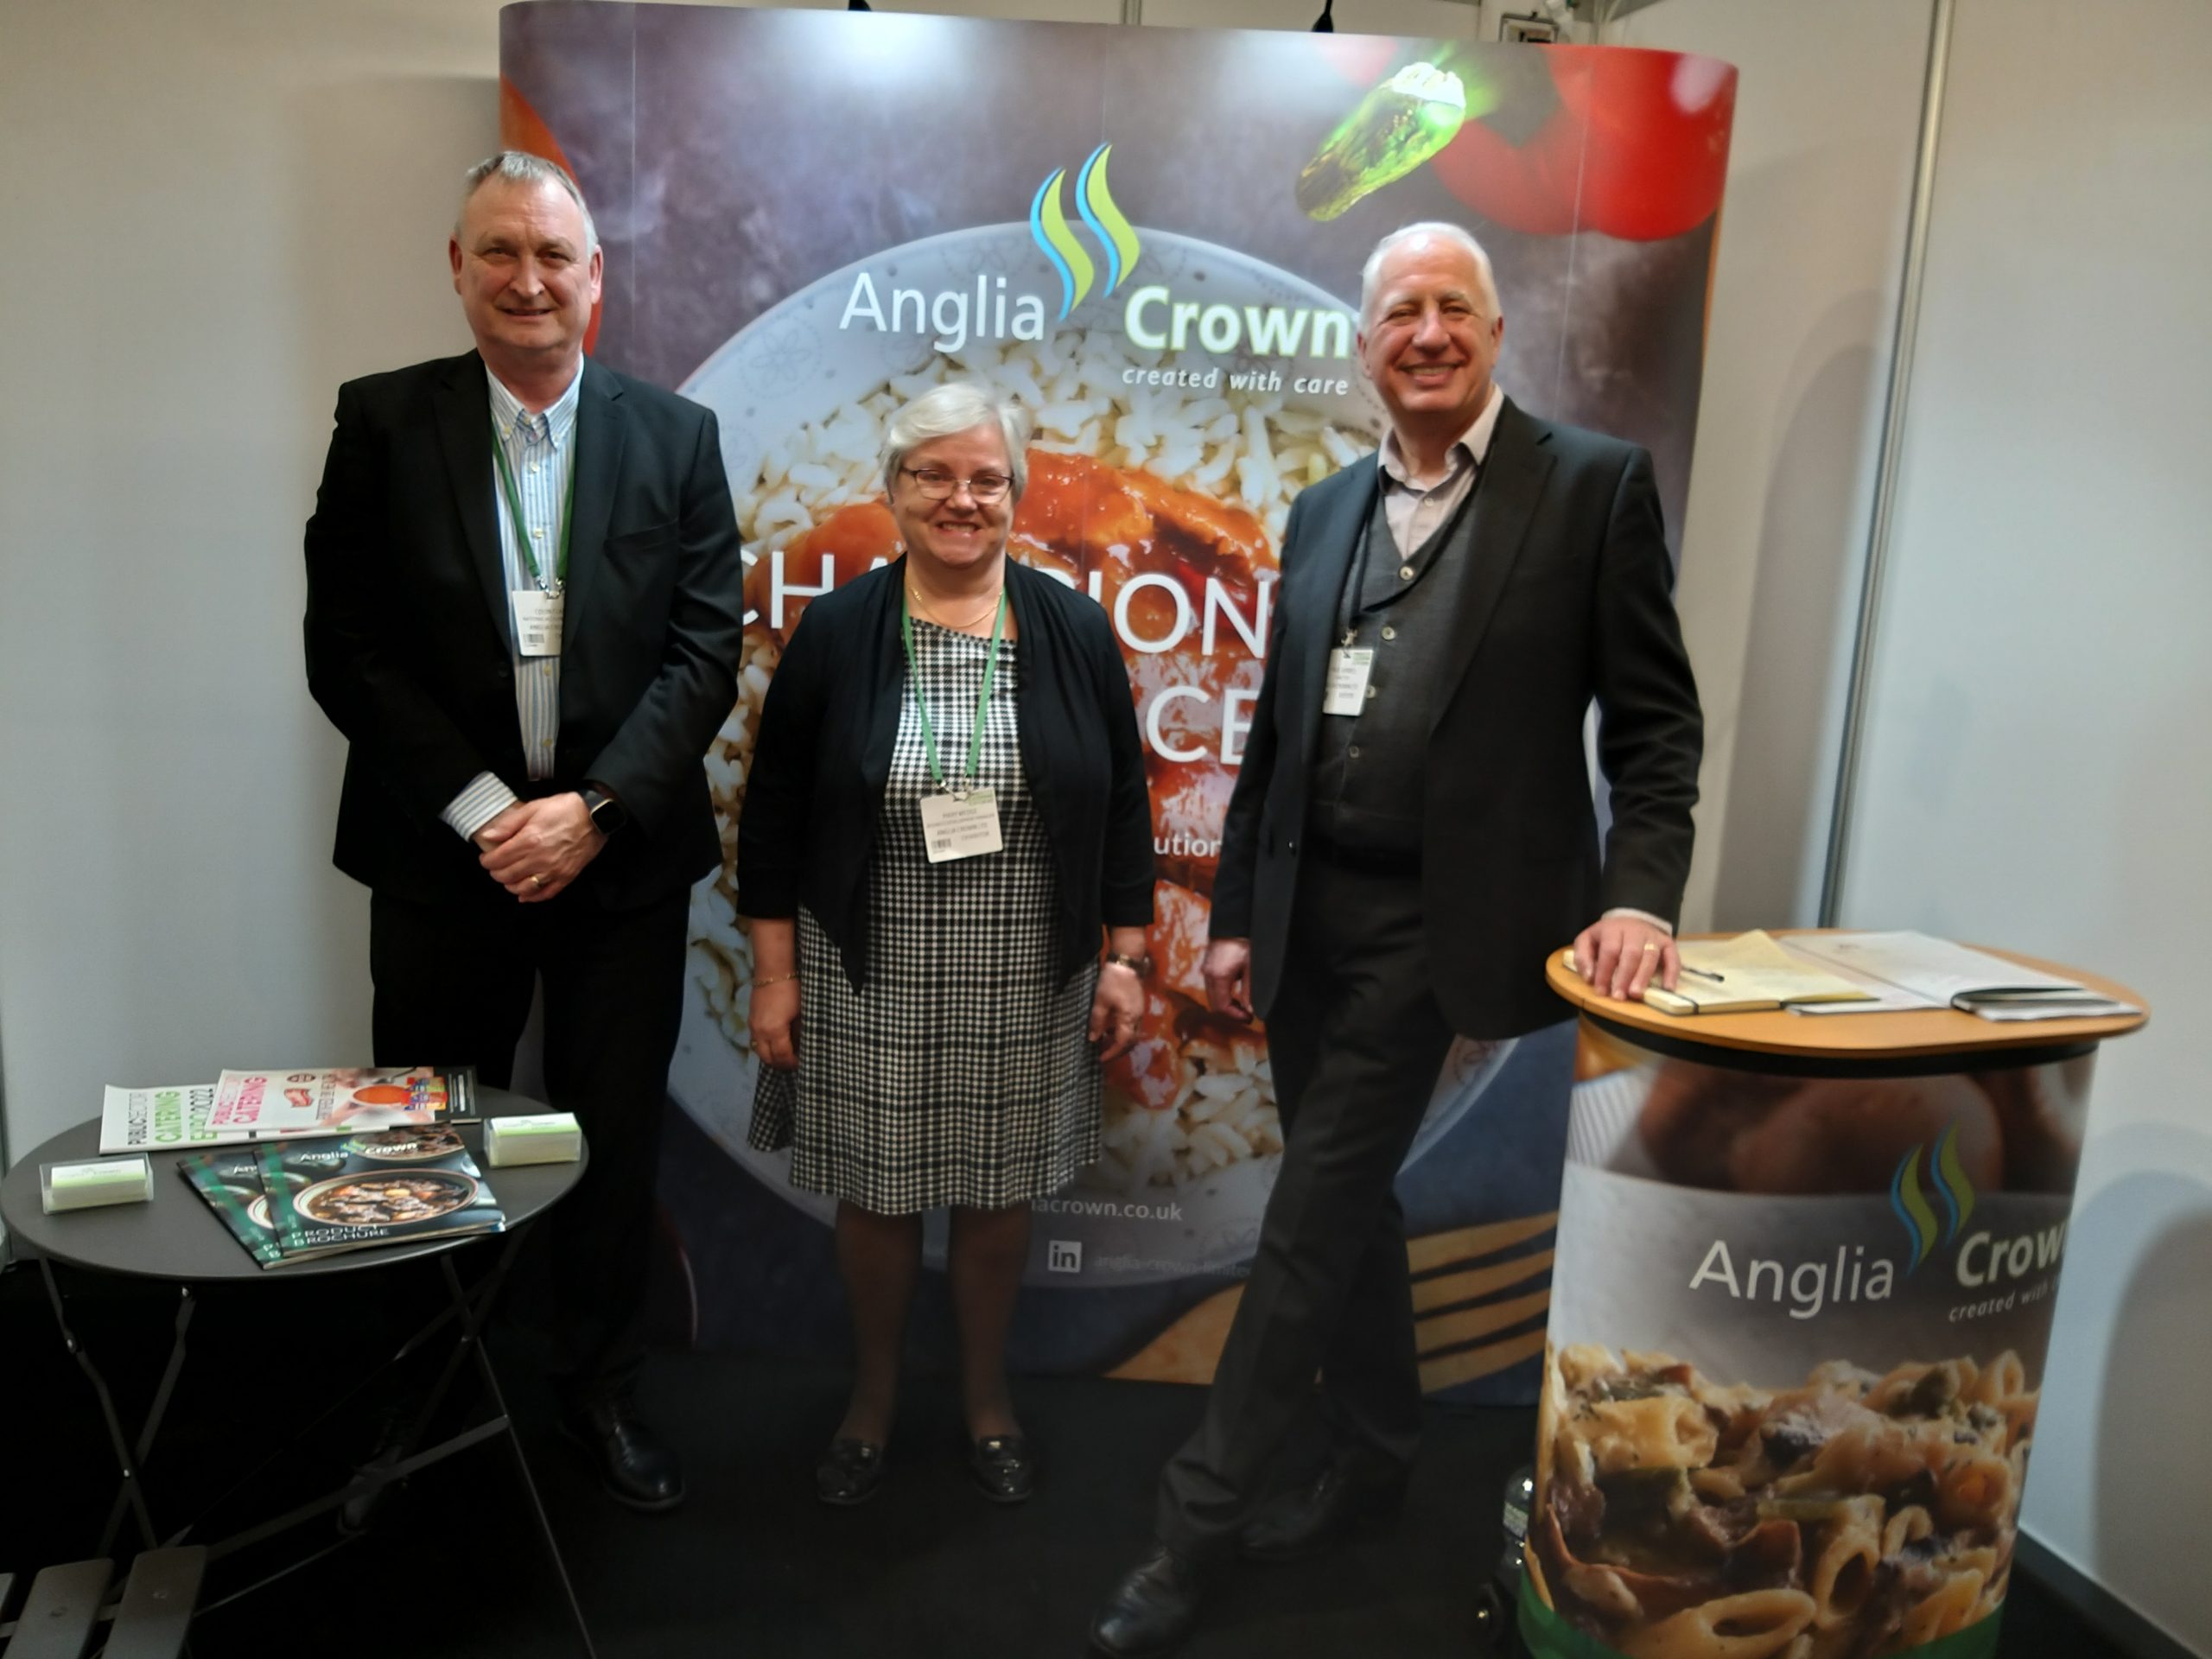 Anglia Crown at the PSC Expo